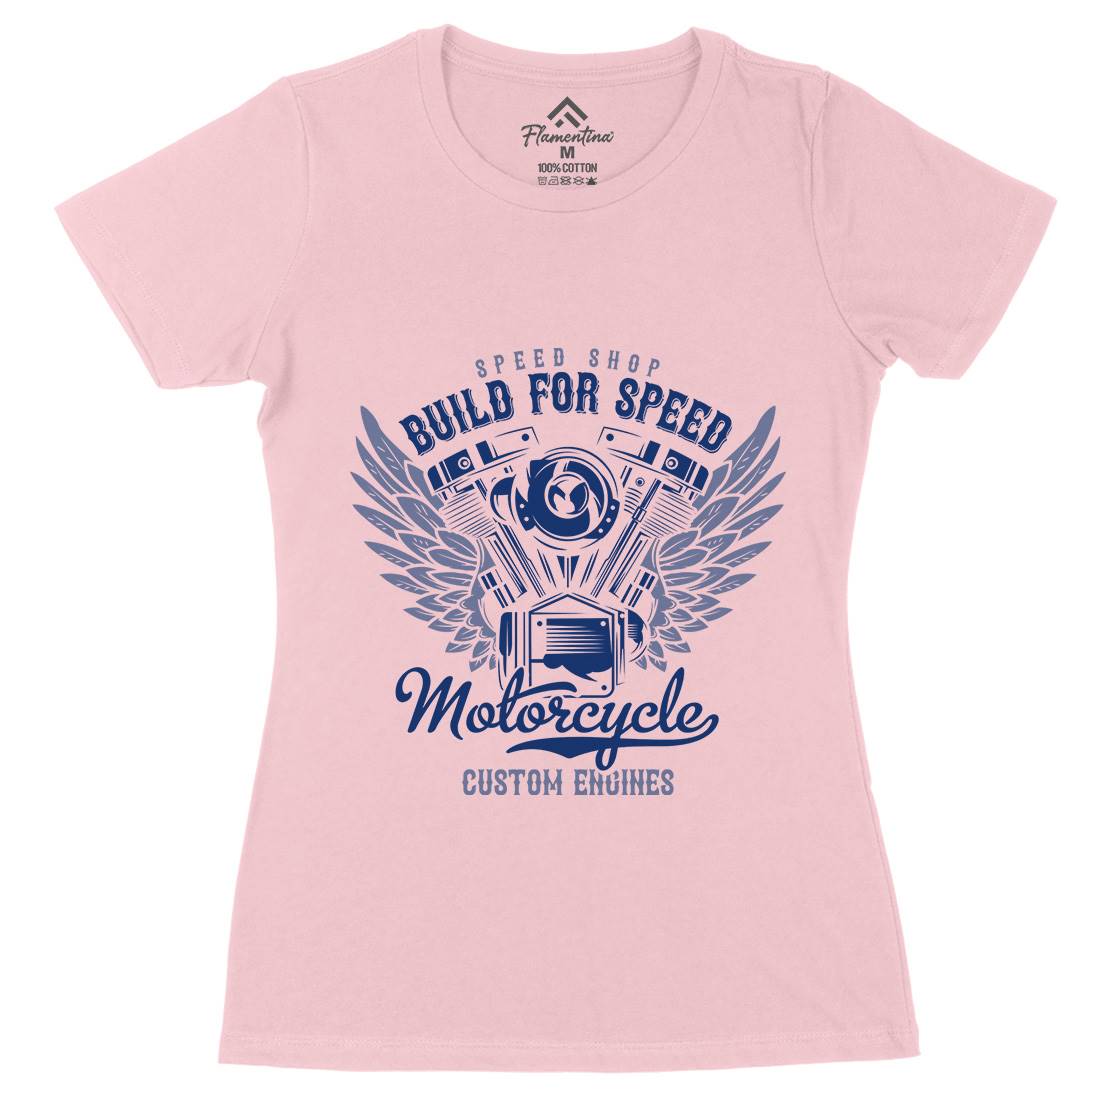 Build For Speed Womens Organic Crew Neck T-Shirt Motorcycles B842